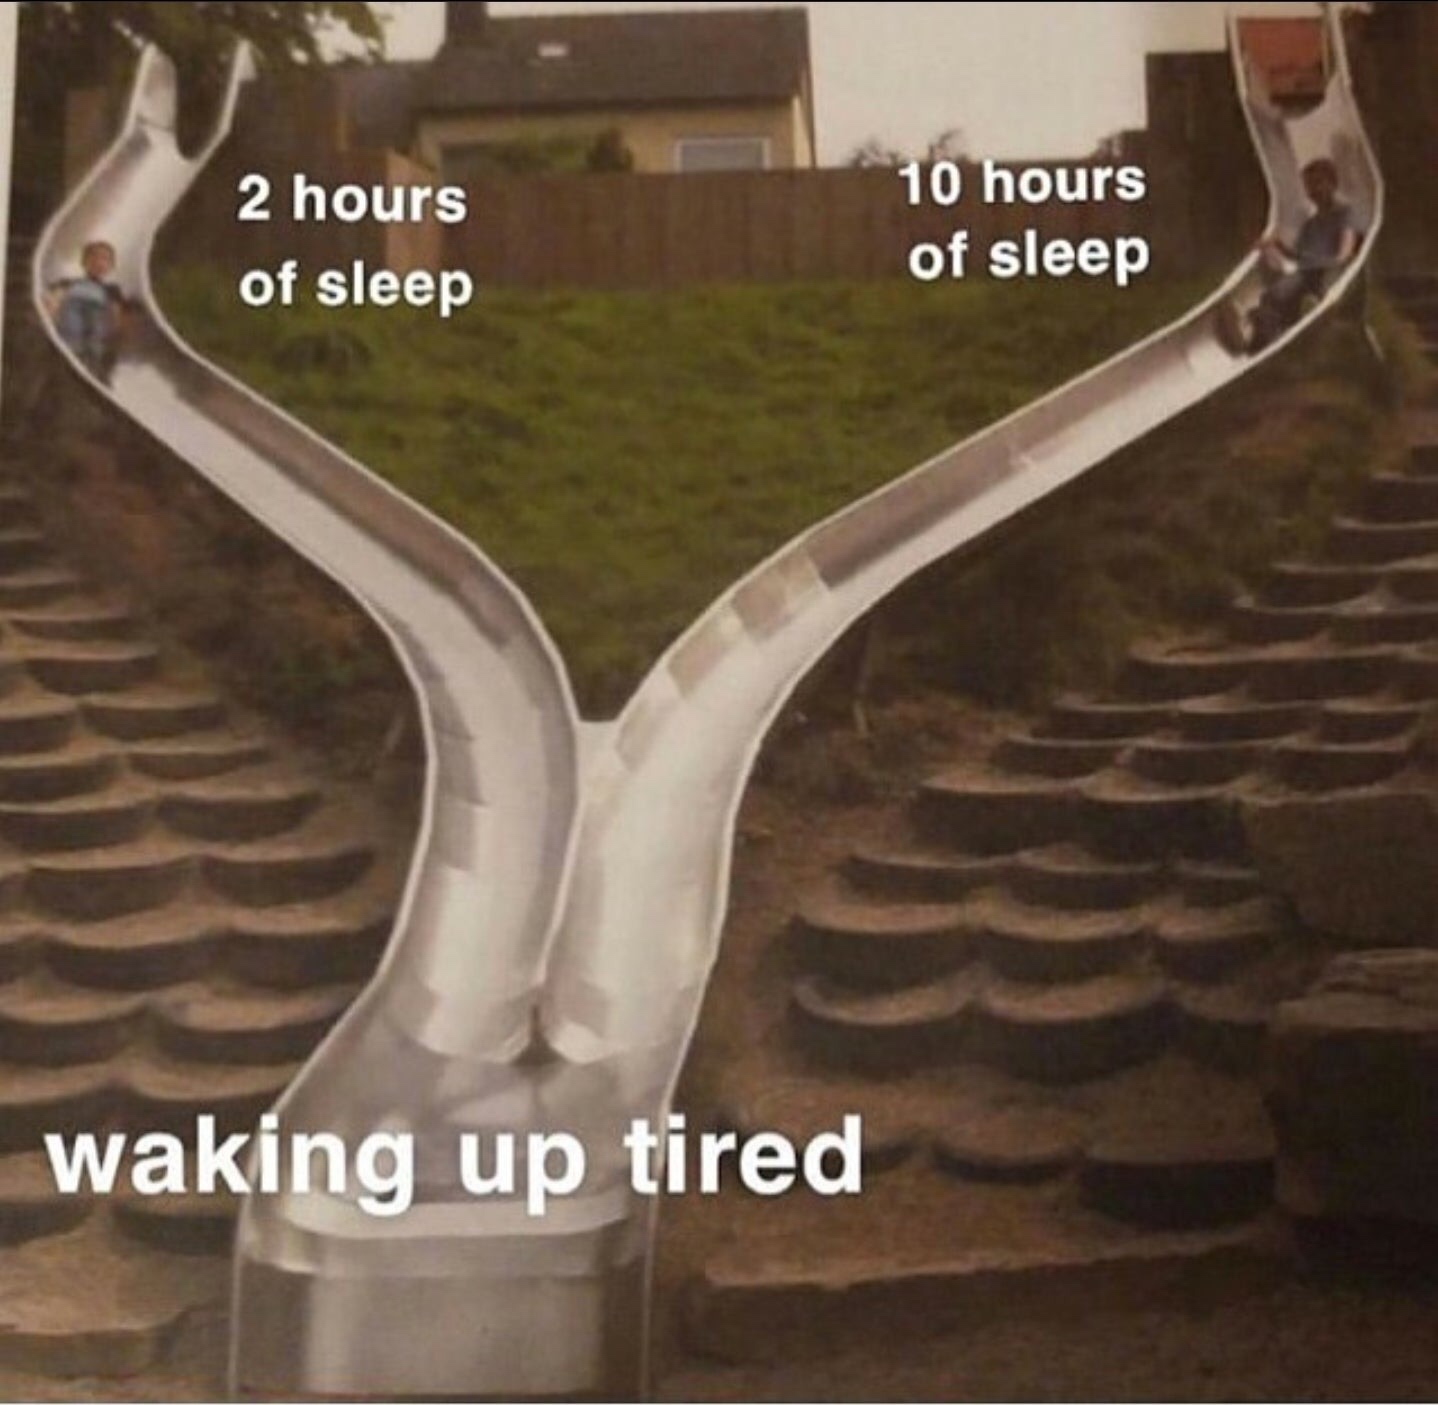 two slides meme template - 2 hours of sleep 10 hours of sleep waking up tired